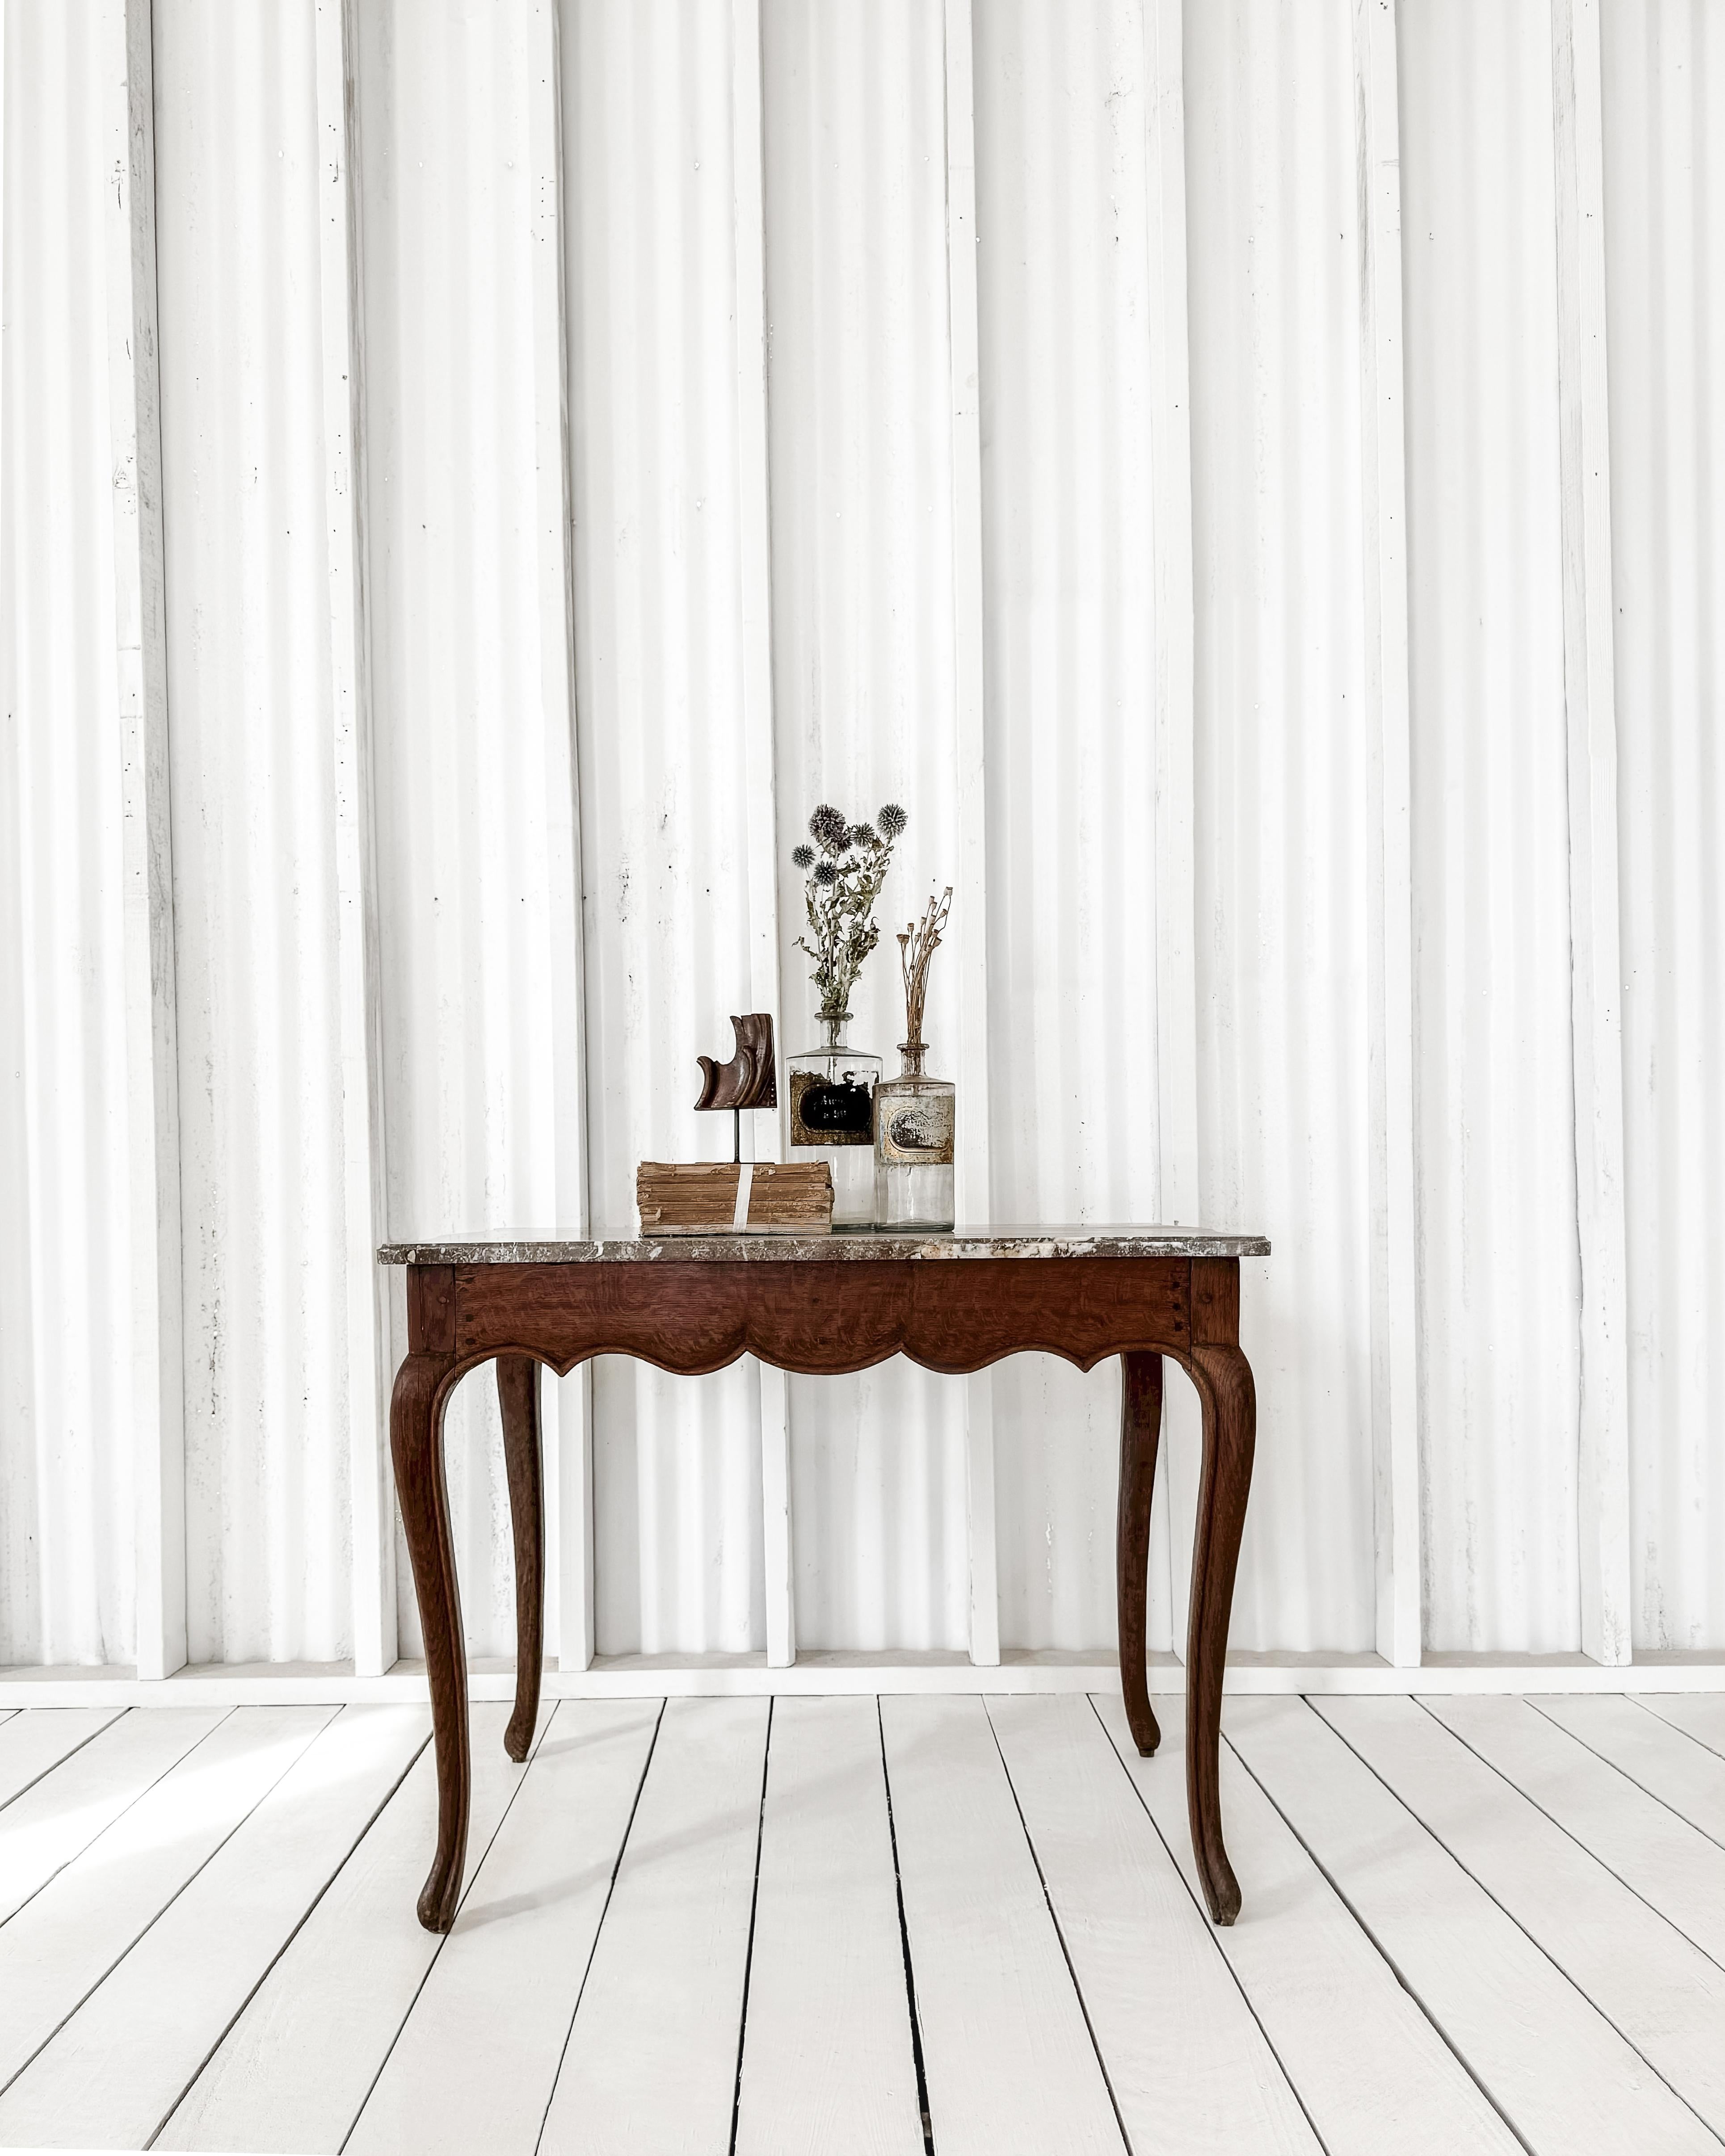 This stunning occasional table features graceful lines and a beautiful marble top that adds charm to any space. The shaped top is crafted from a rich Rojo marble, showcasing striking alabaster veining and an elegant ogee edge.

Perfect as an accent